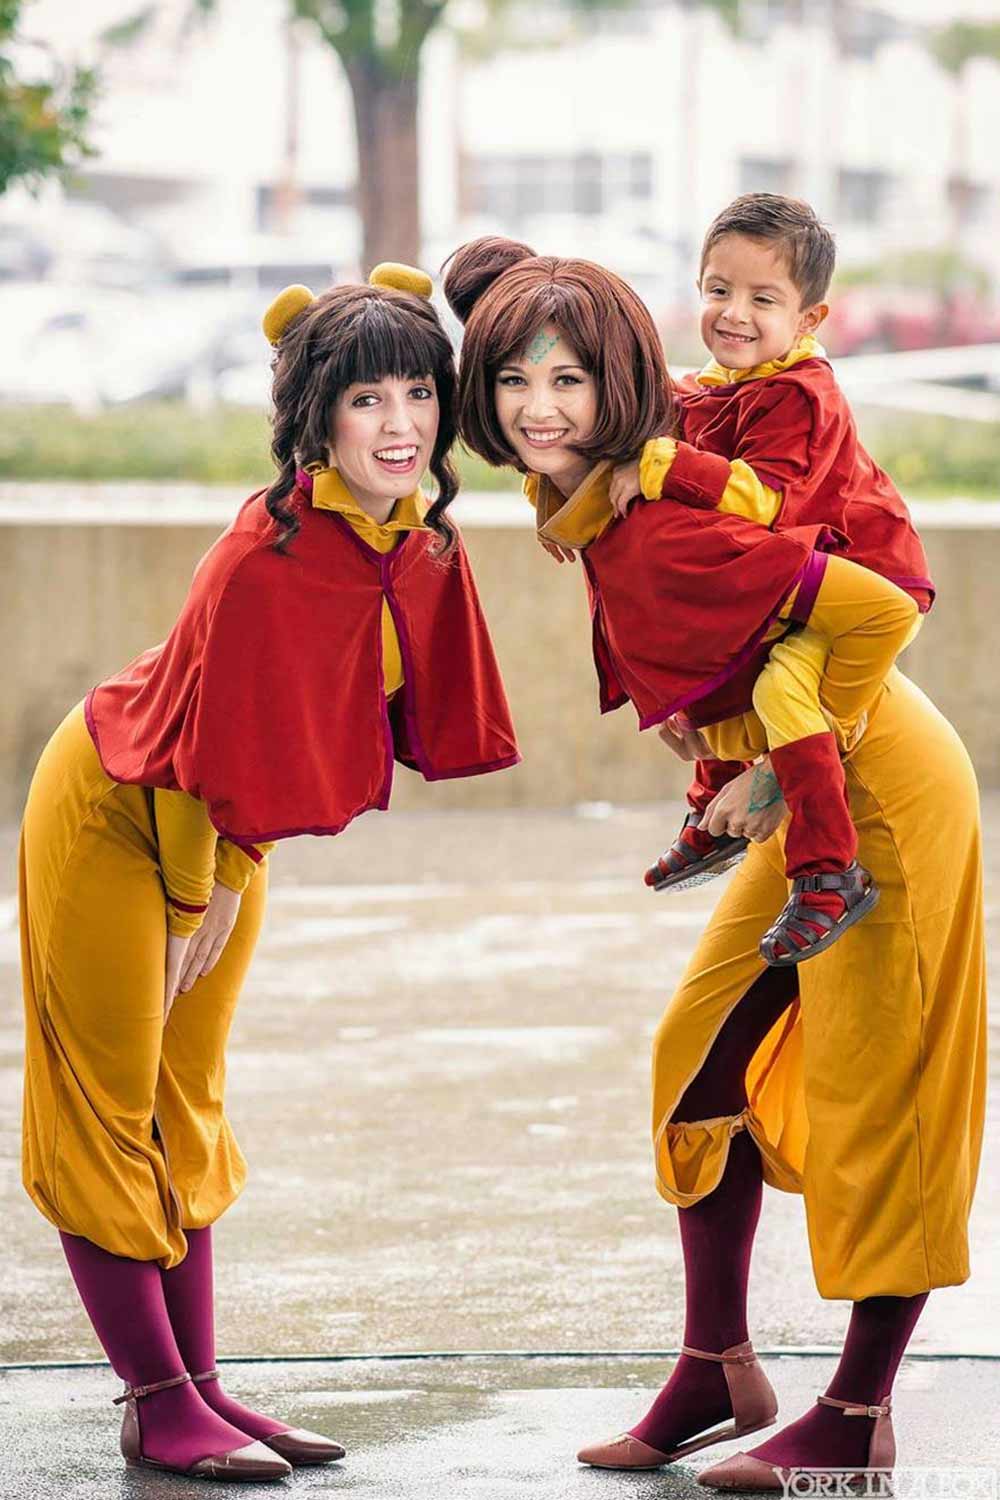 Avatar The Last Airbender Inspired Halloween Costumes